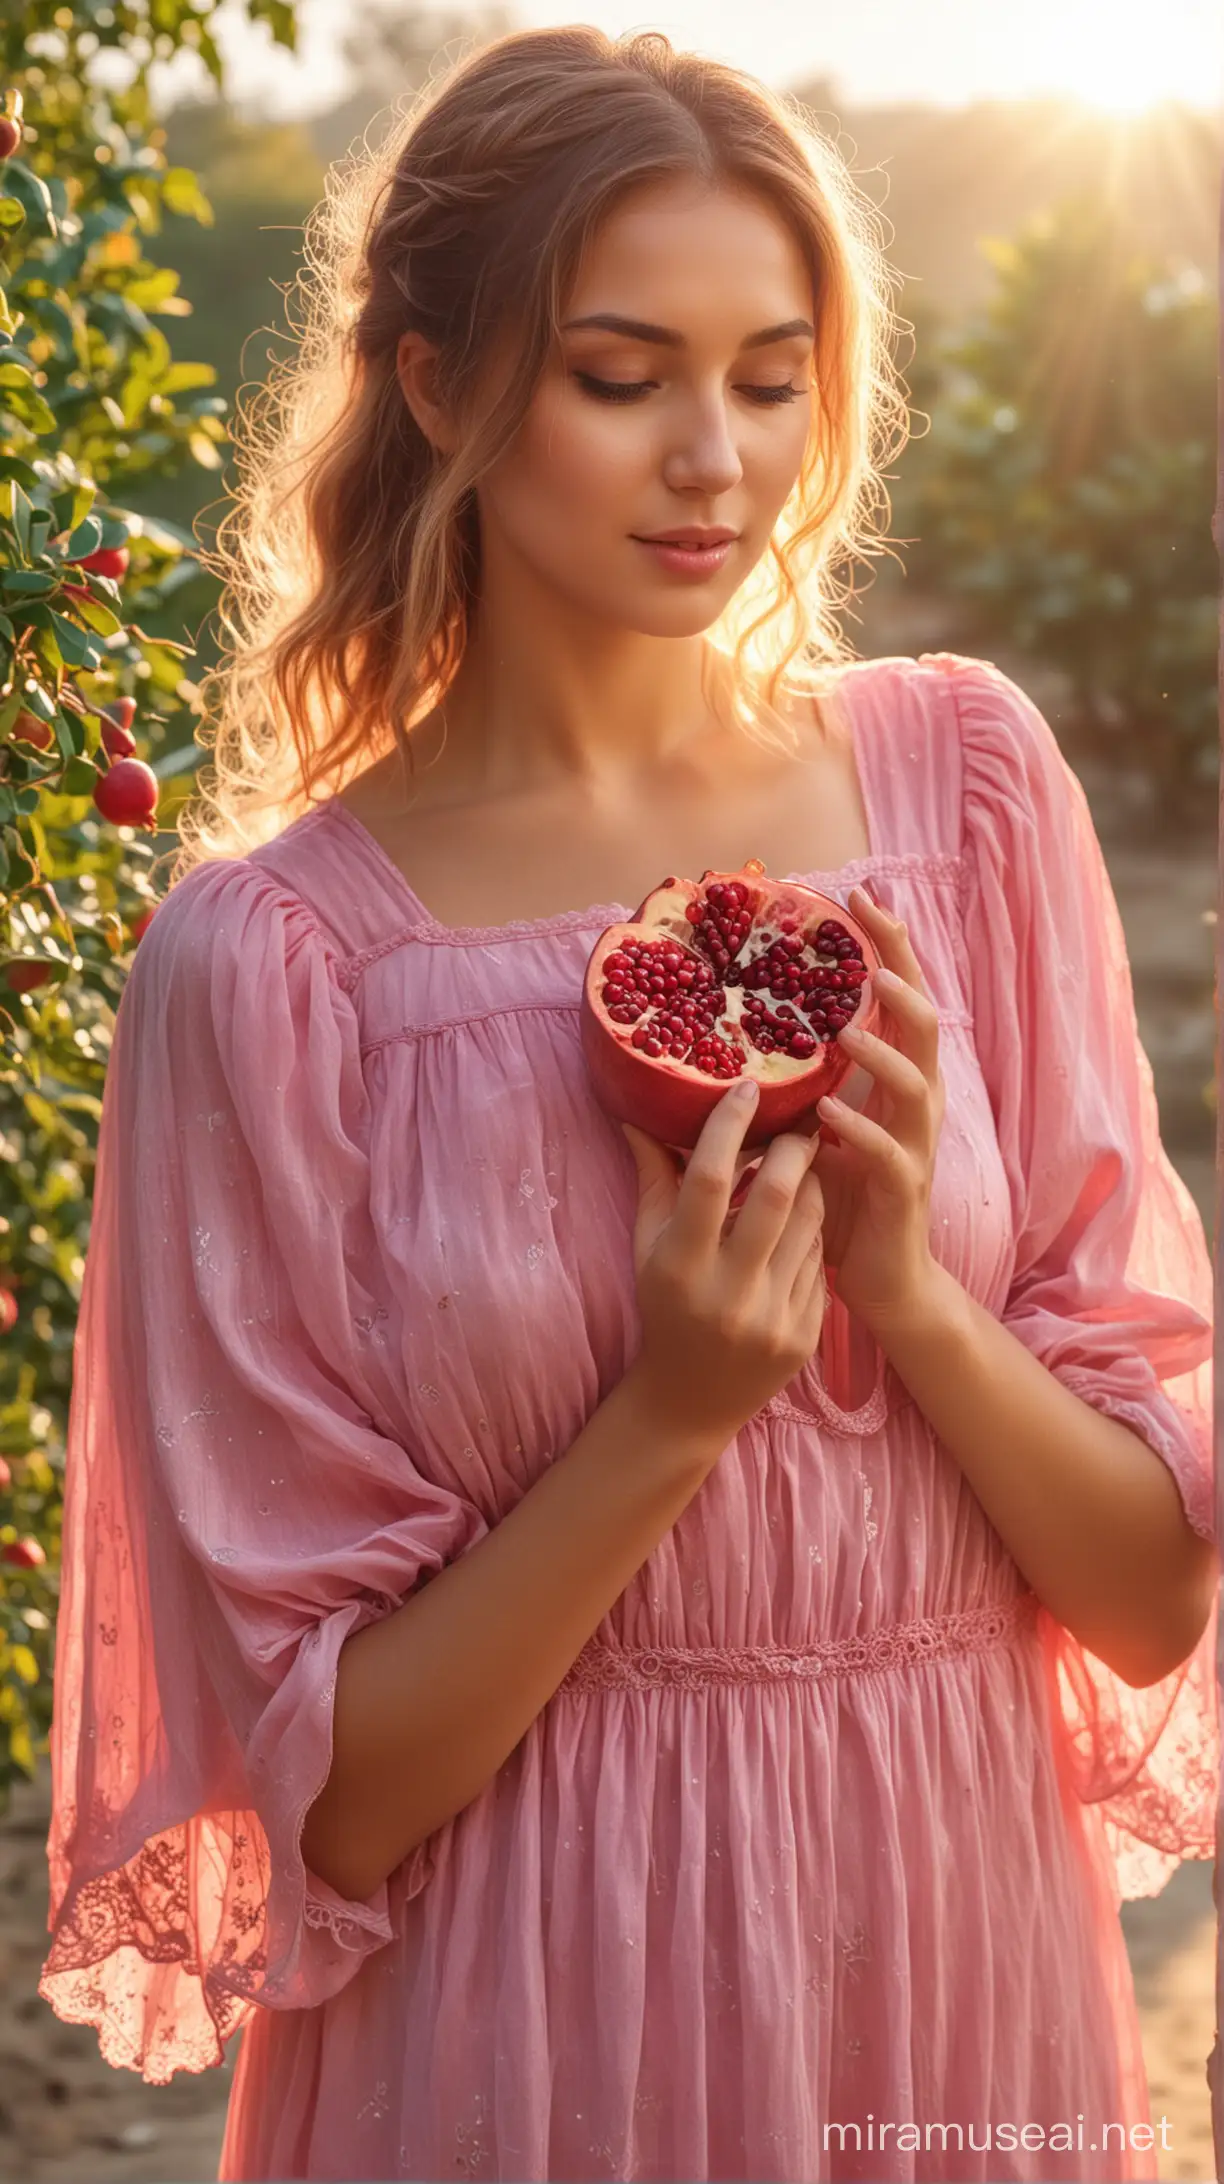 Beautiful Angel women with pink dress and holding Pomegranate on hand, natural background, sun light effect, 4k, HDR, morning time weather